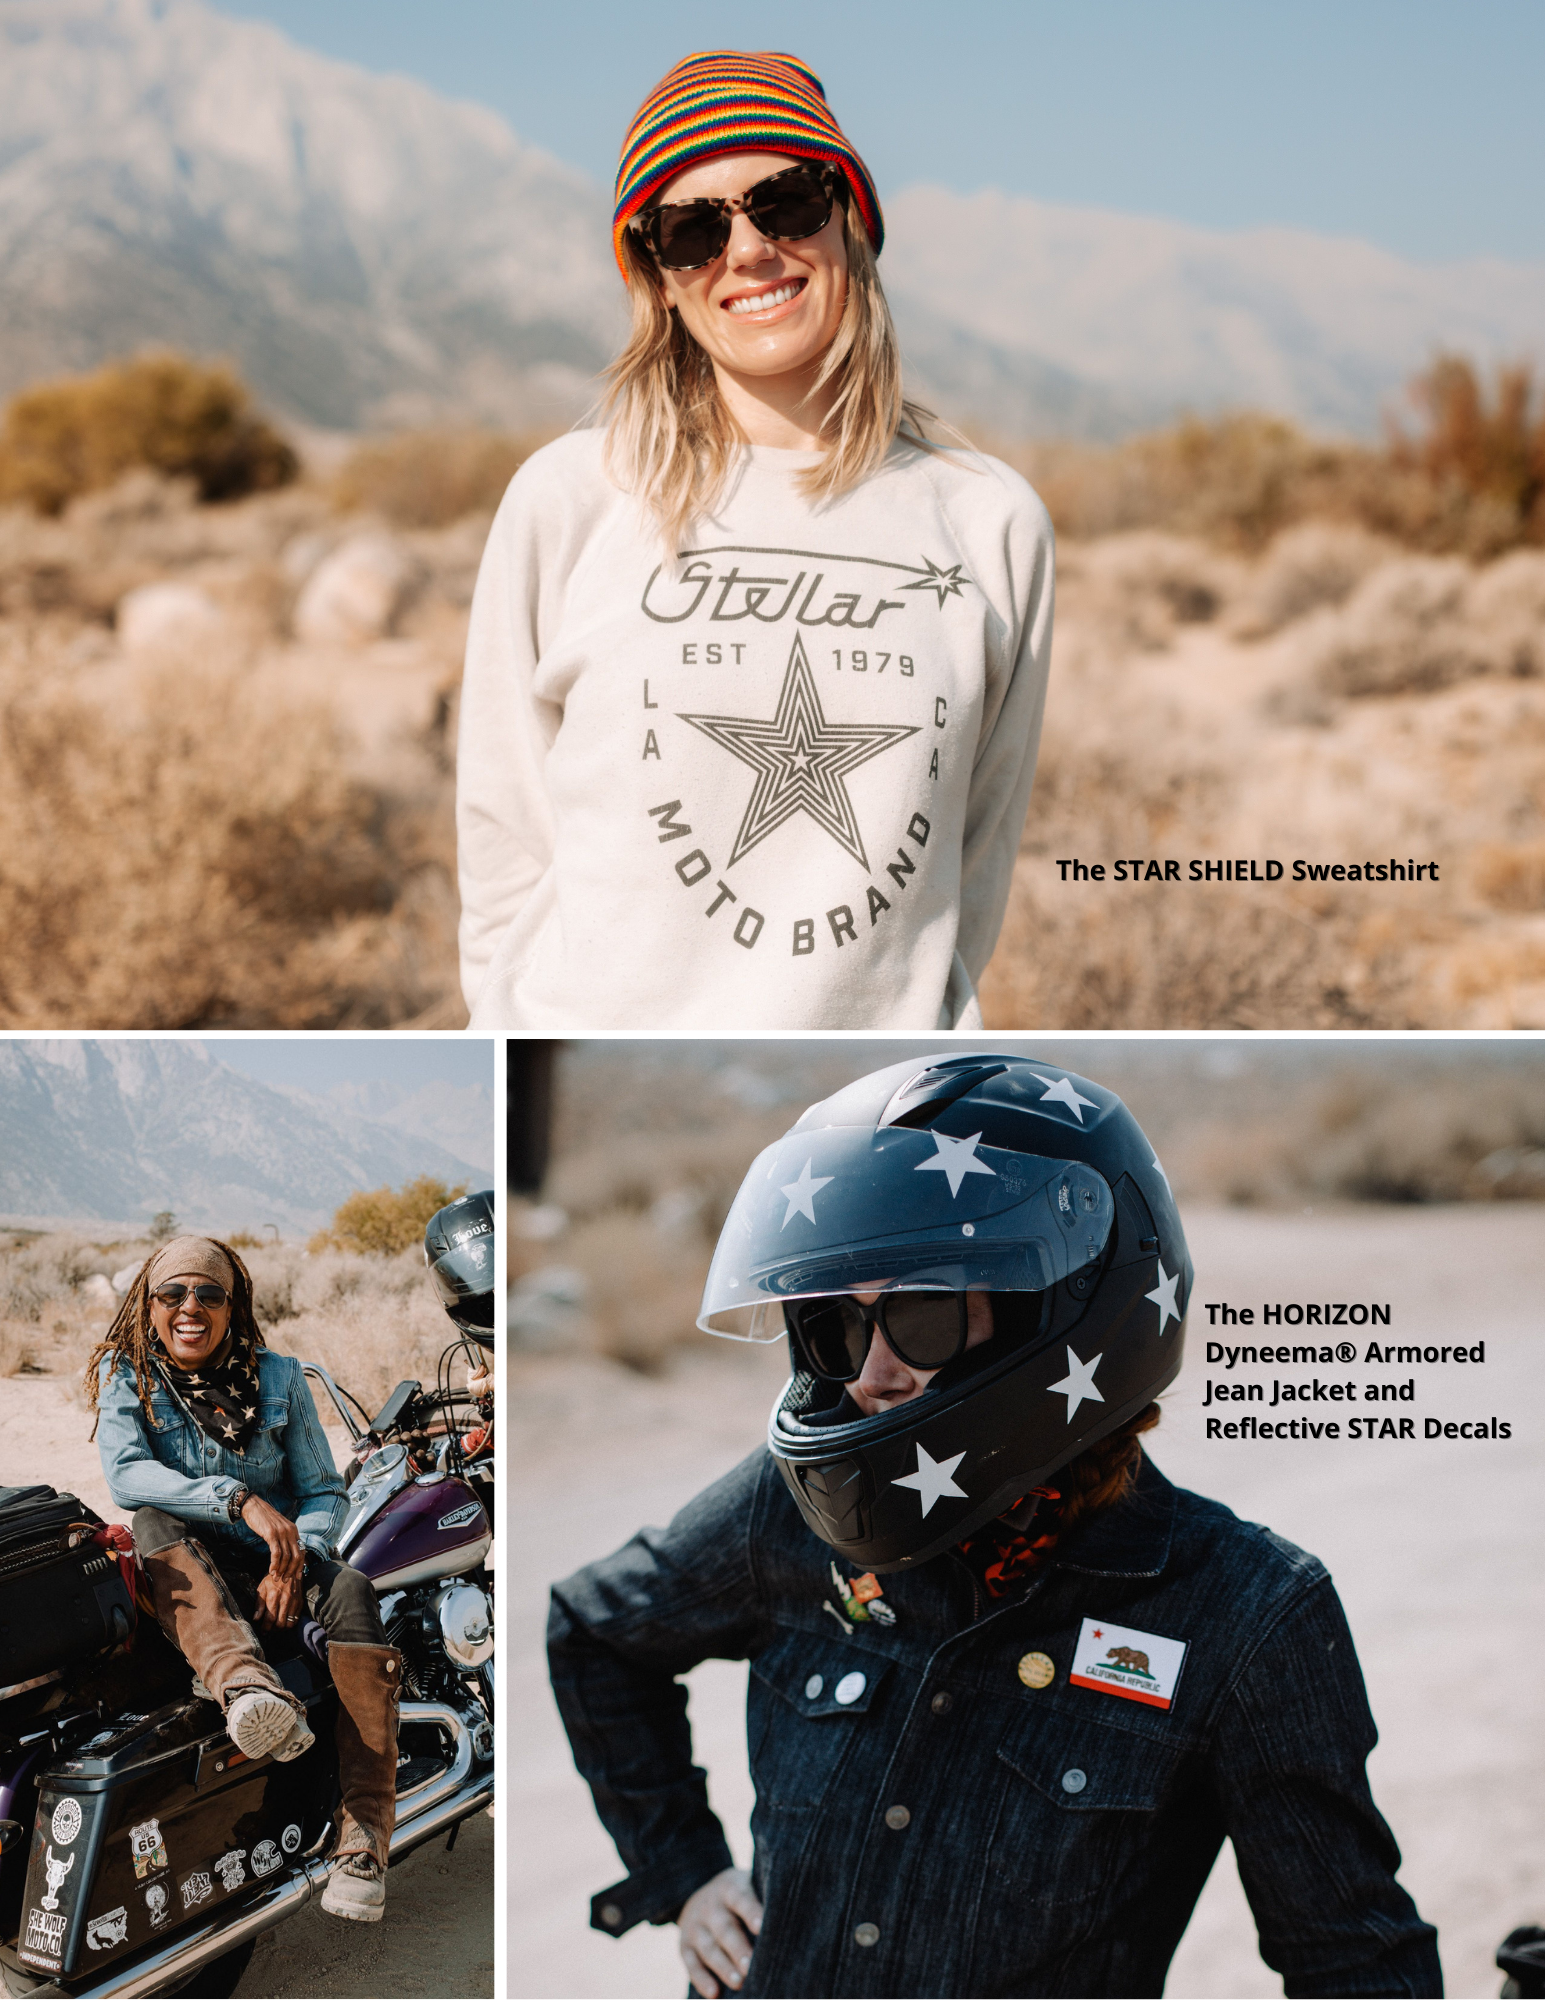 Wearing the The STAR SHIELD Sweatshirt and the HORIZON Dyneema® Armored Jean Jacket and Reflective STAR Decals  